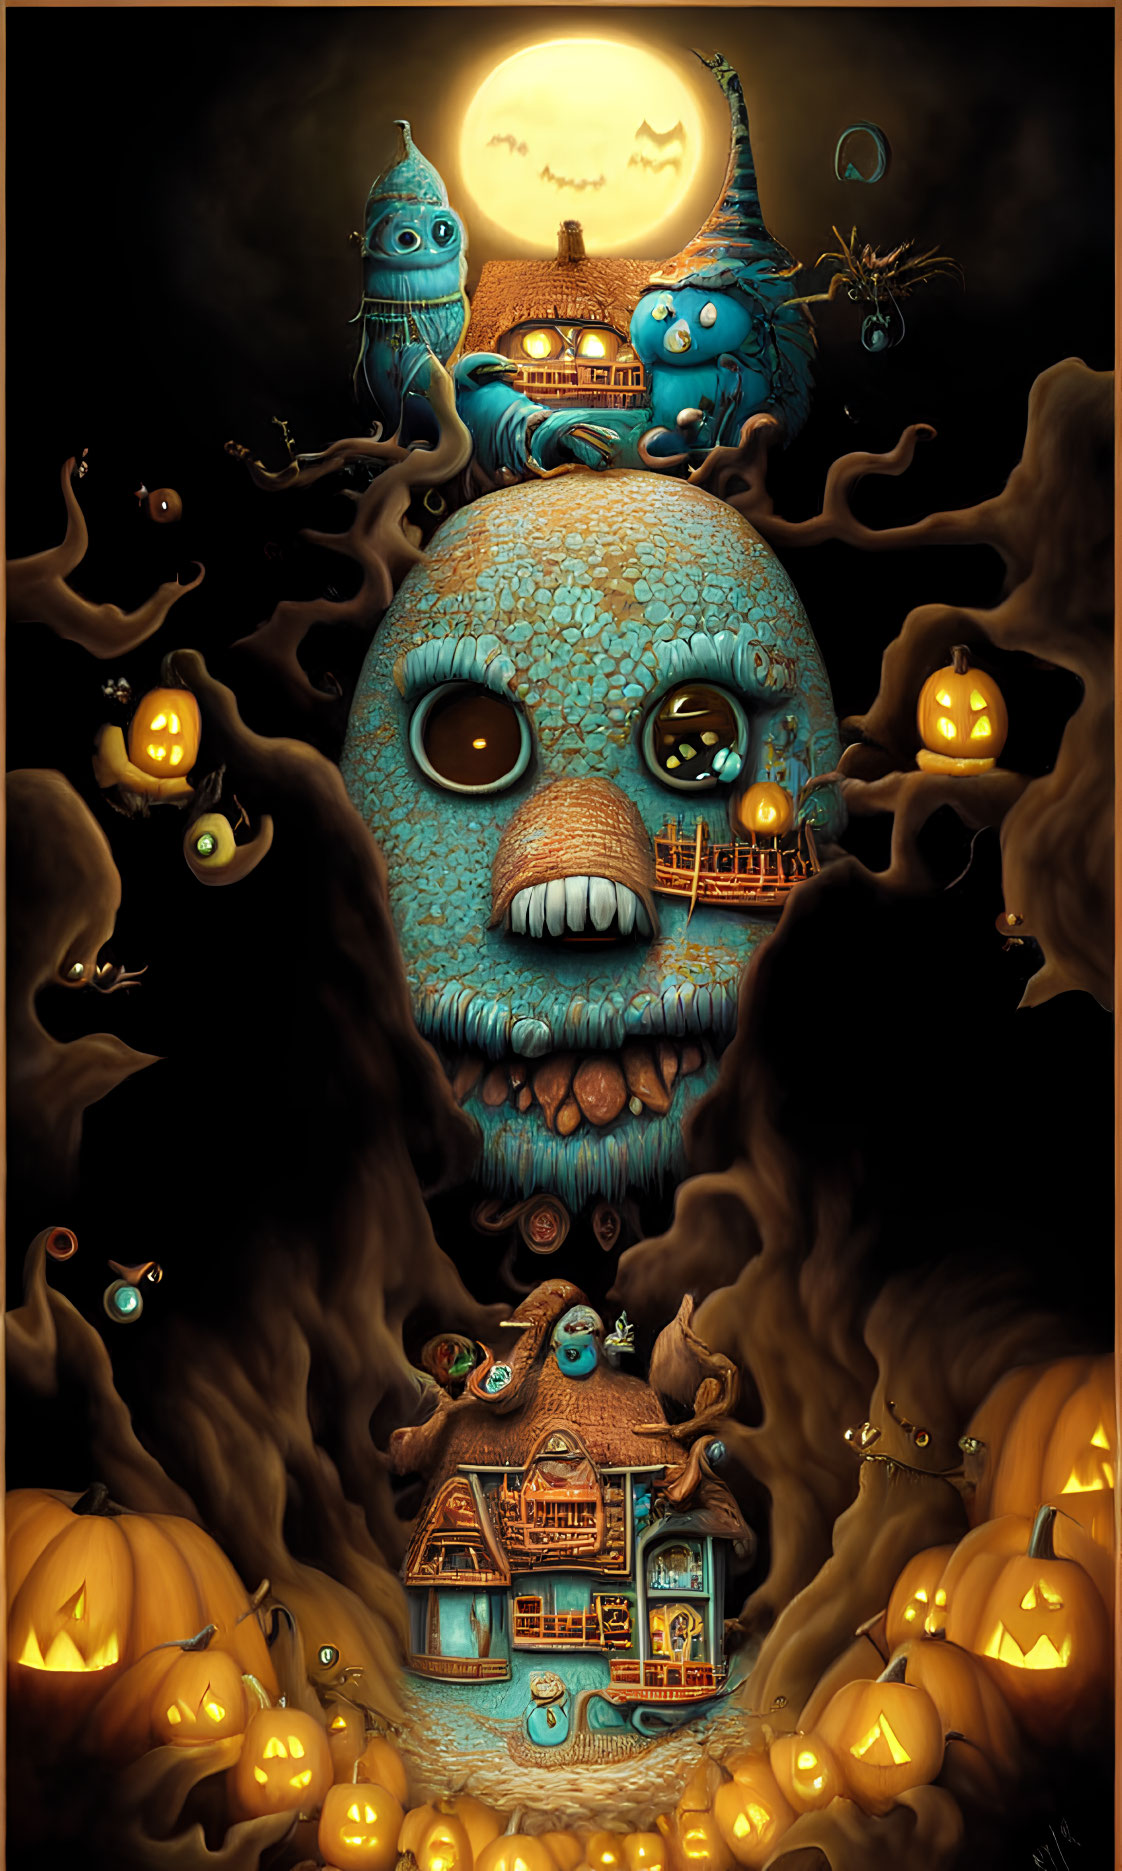 Whimsical Halloween illustration with blue creature, village, jack-o'-lanterns, and full